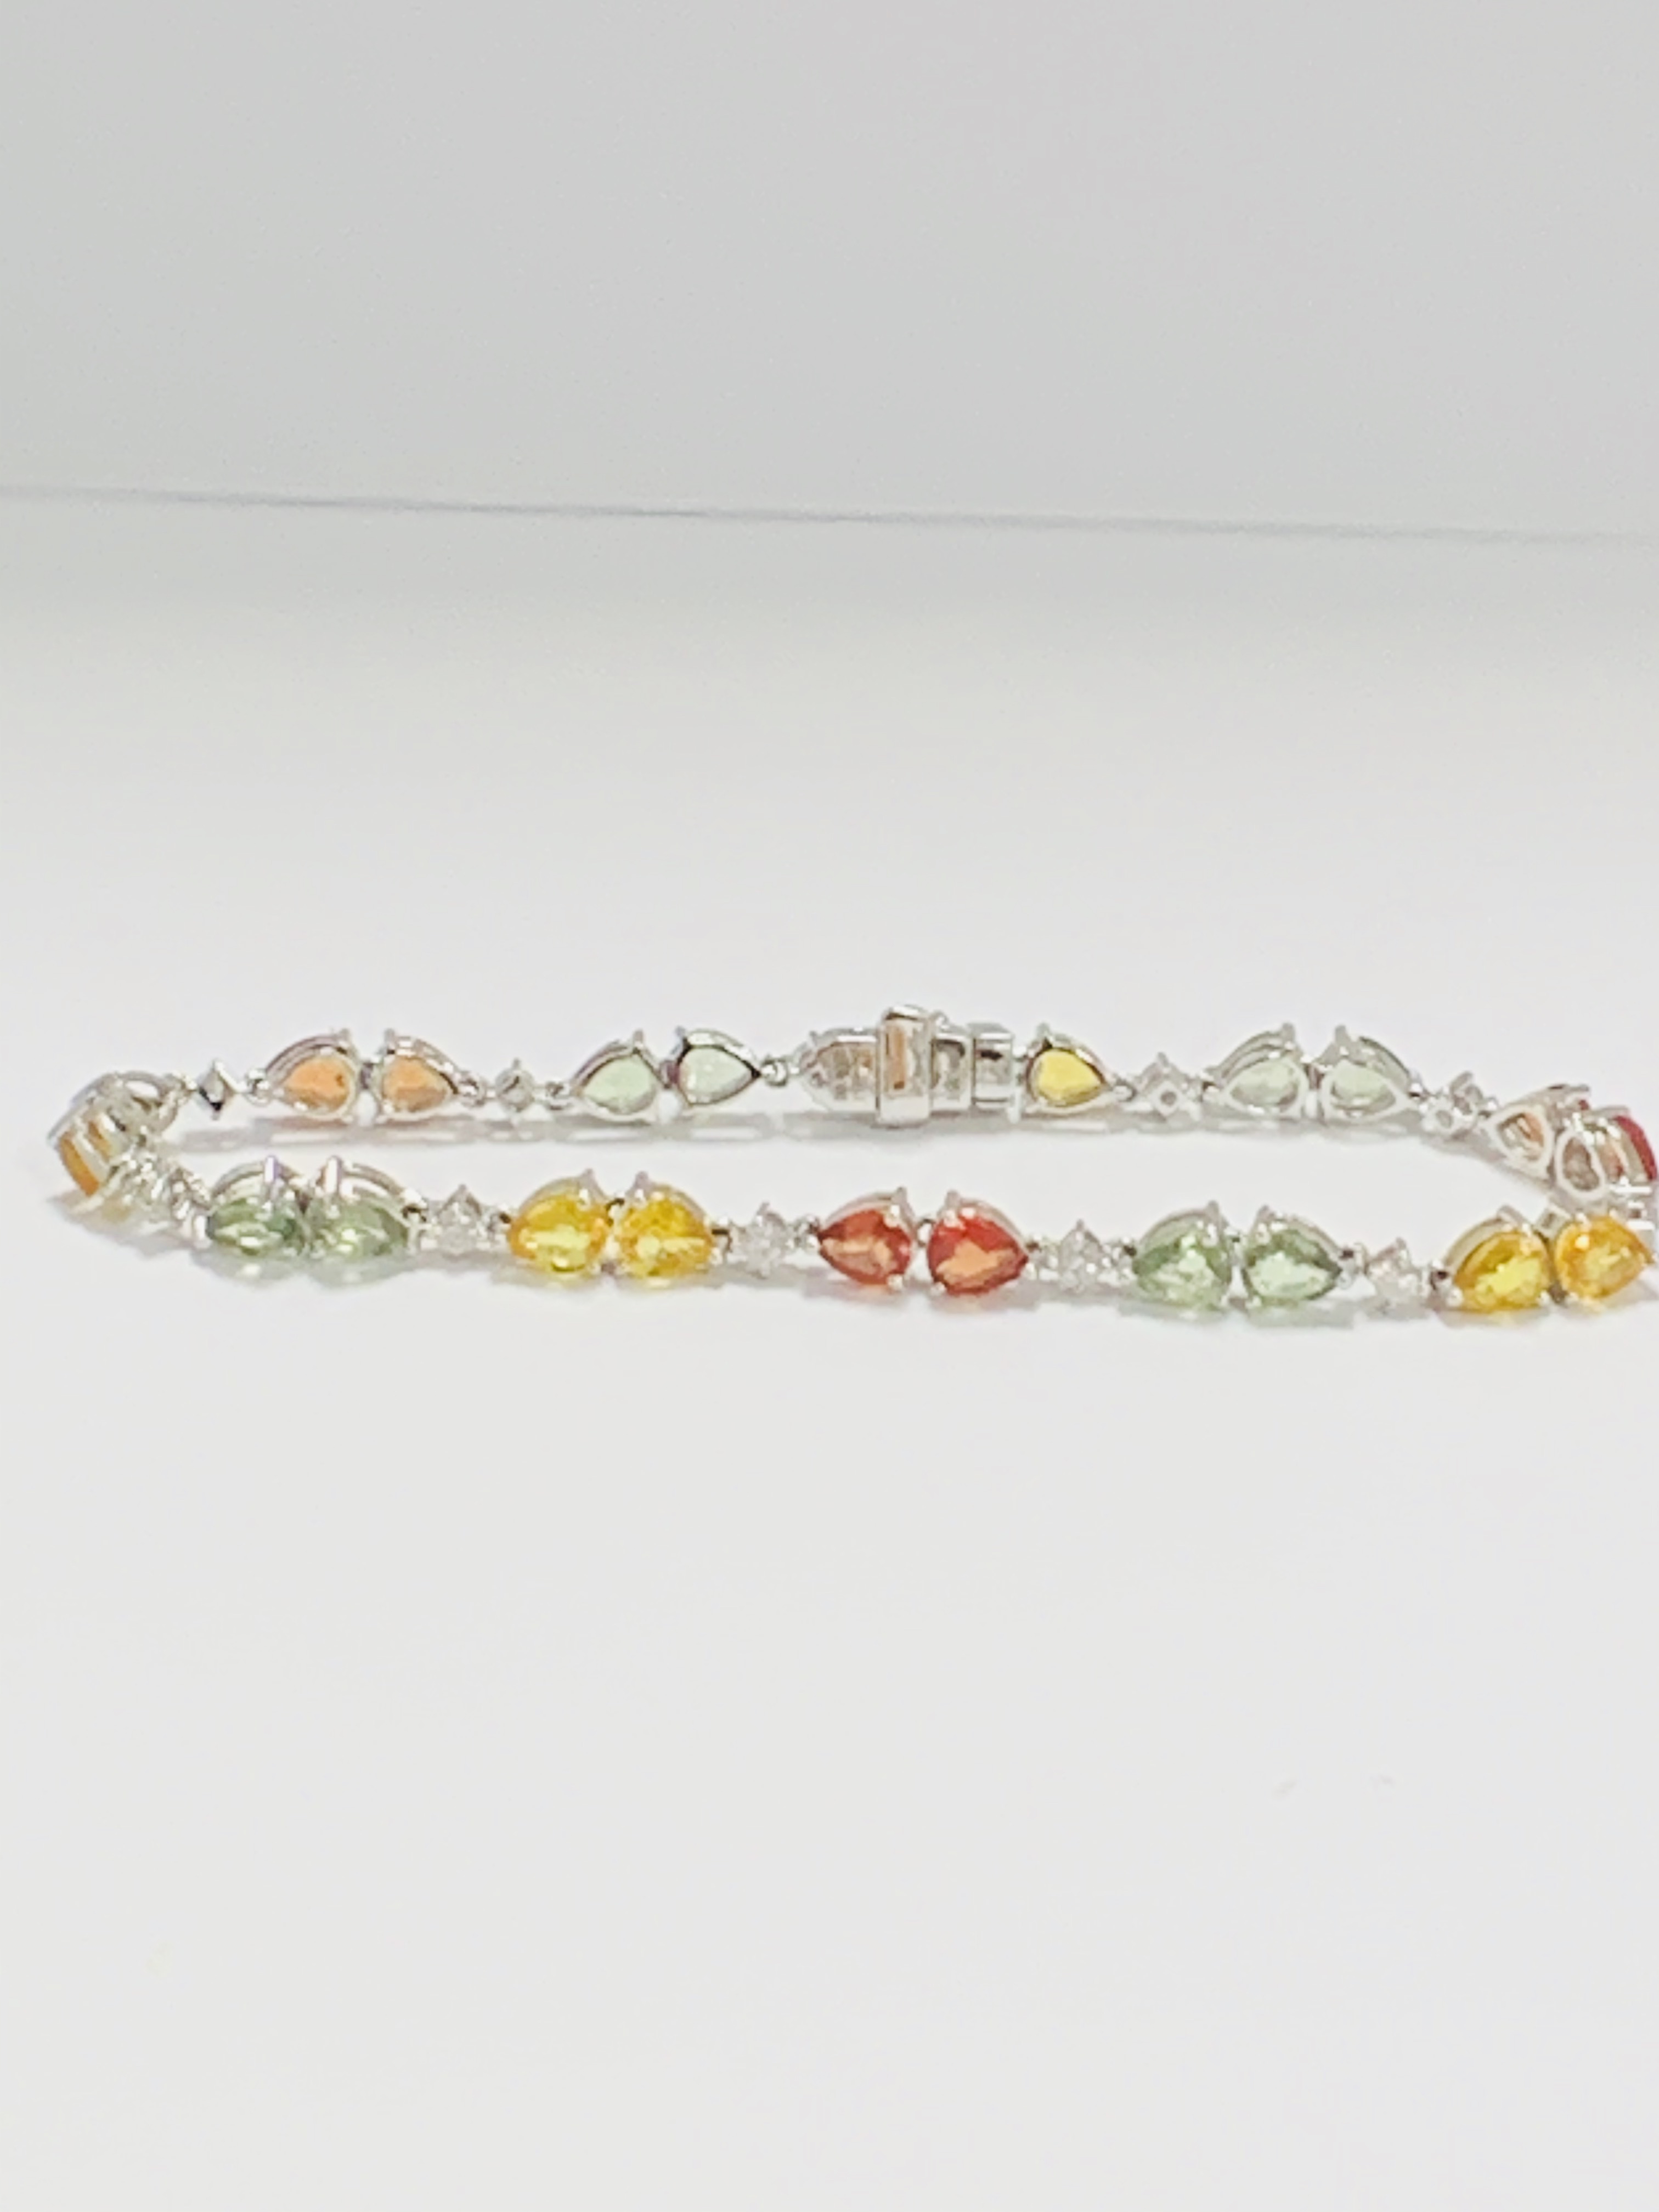 14ct White Gold Sapphire and Diamond bracelet featuring, 22 pear cut, yellow, green and orange Sapph - Image 13 of 24